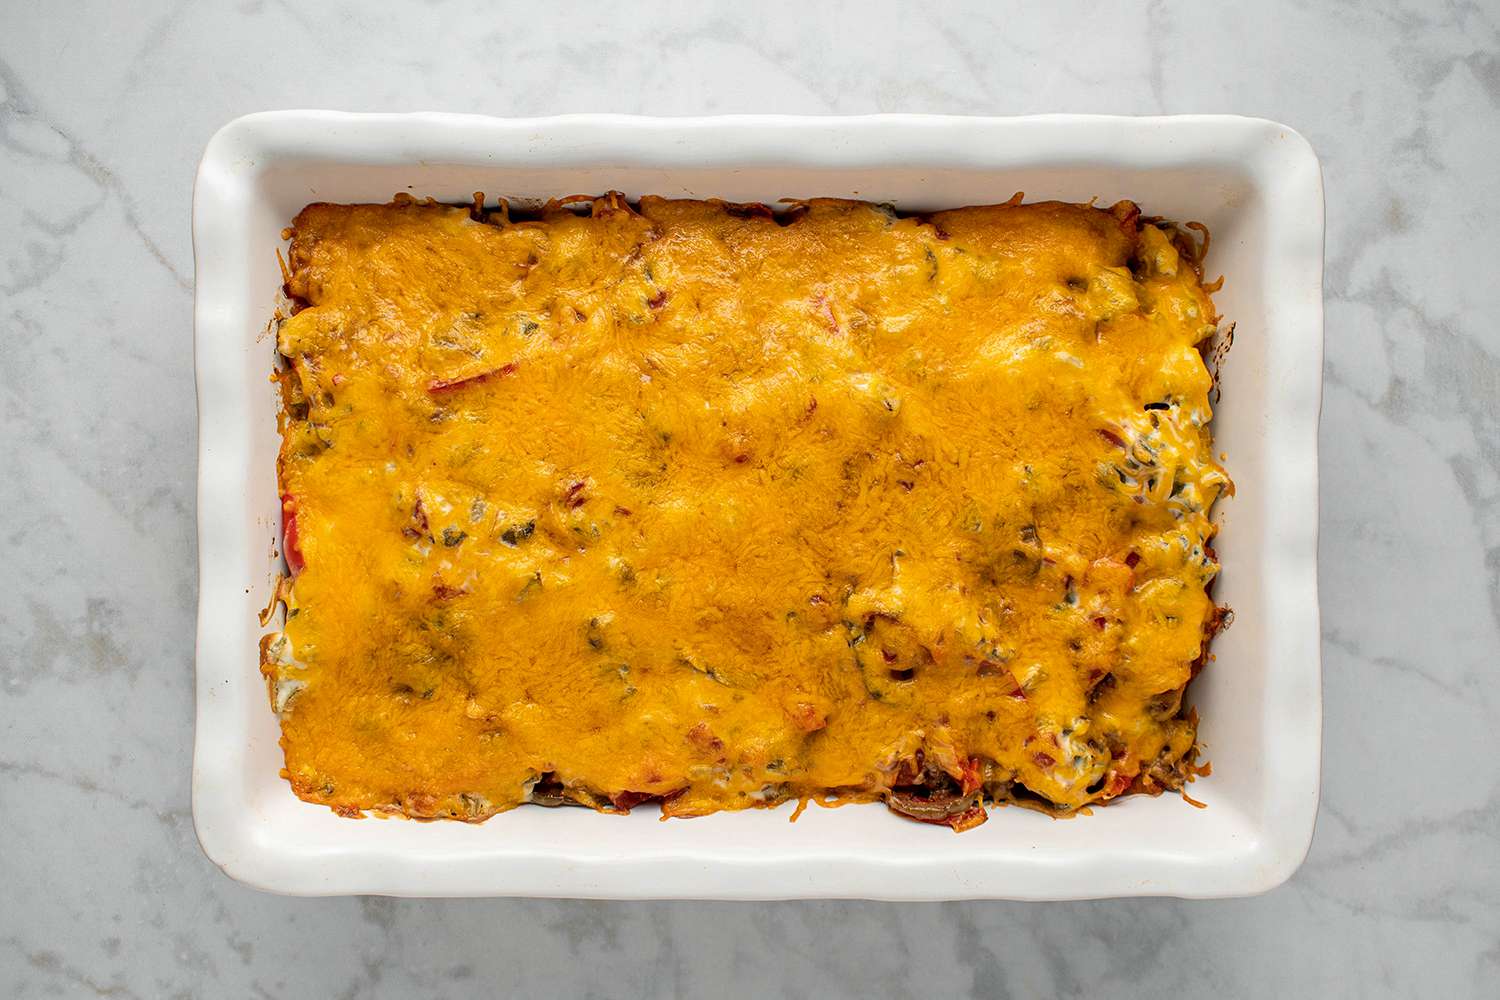 John Wayne casserole with melted cheese topping in a baking dish 